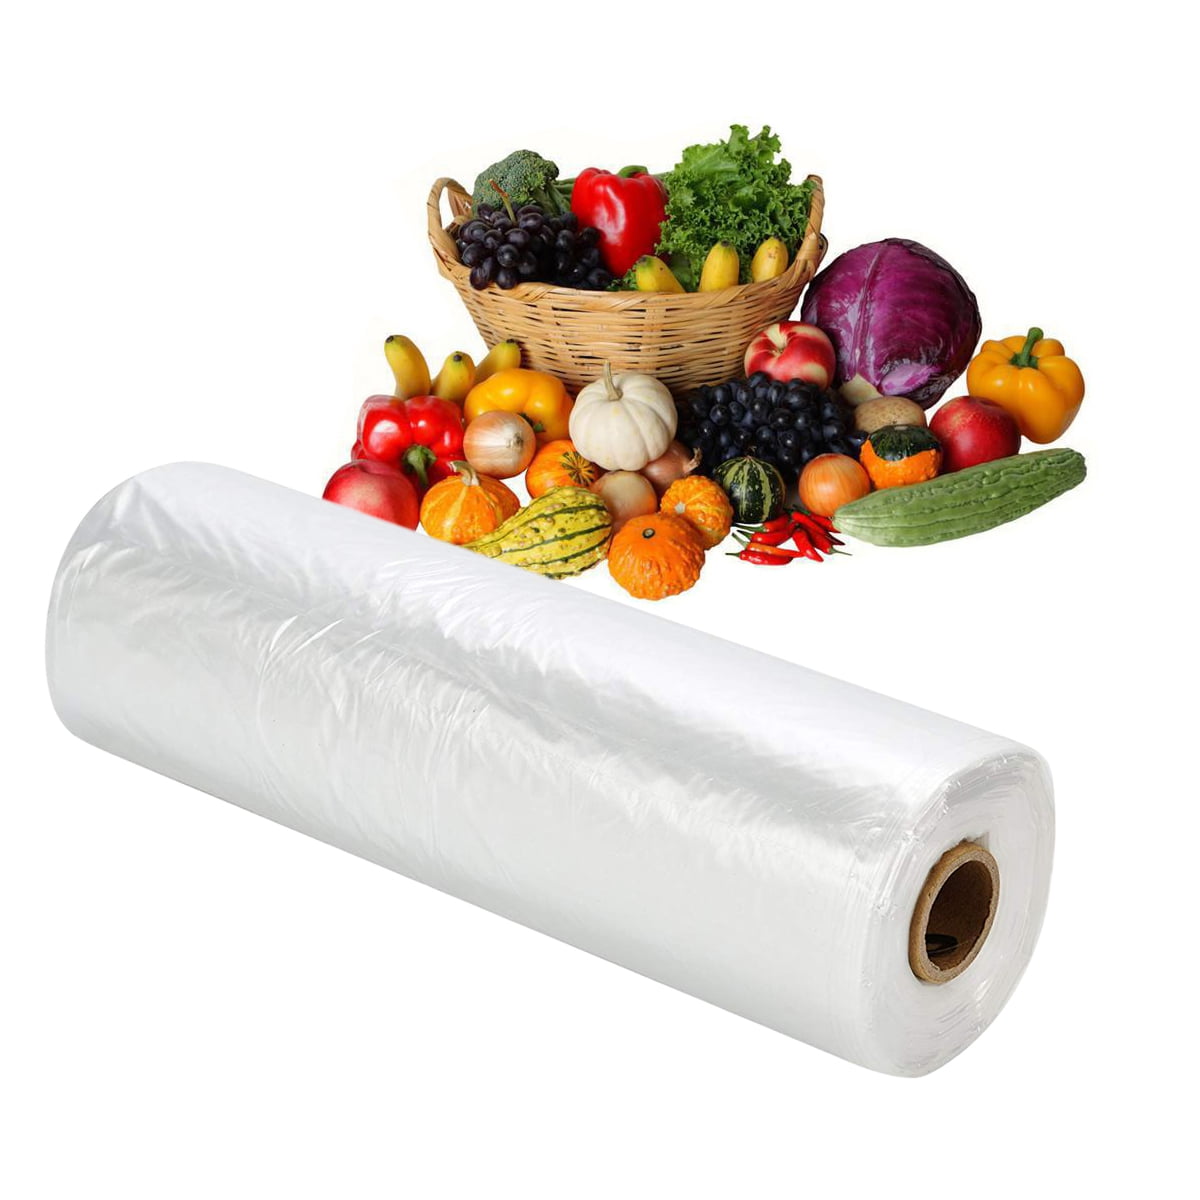 Reusable Clear Food Vegetable Storage Plastic Bag on Roll - China